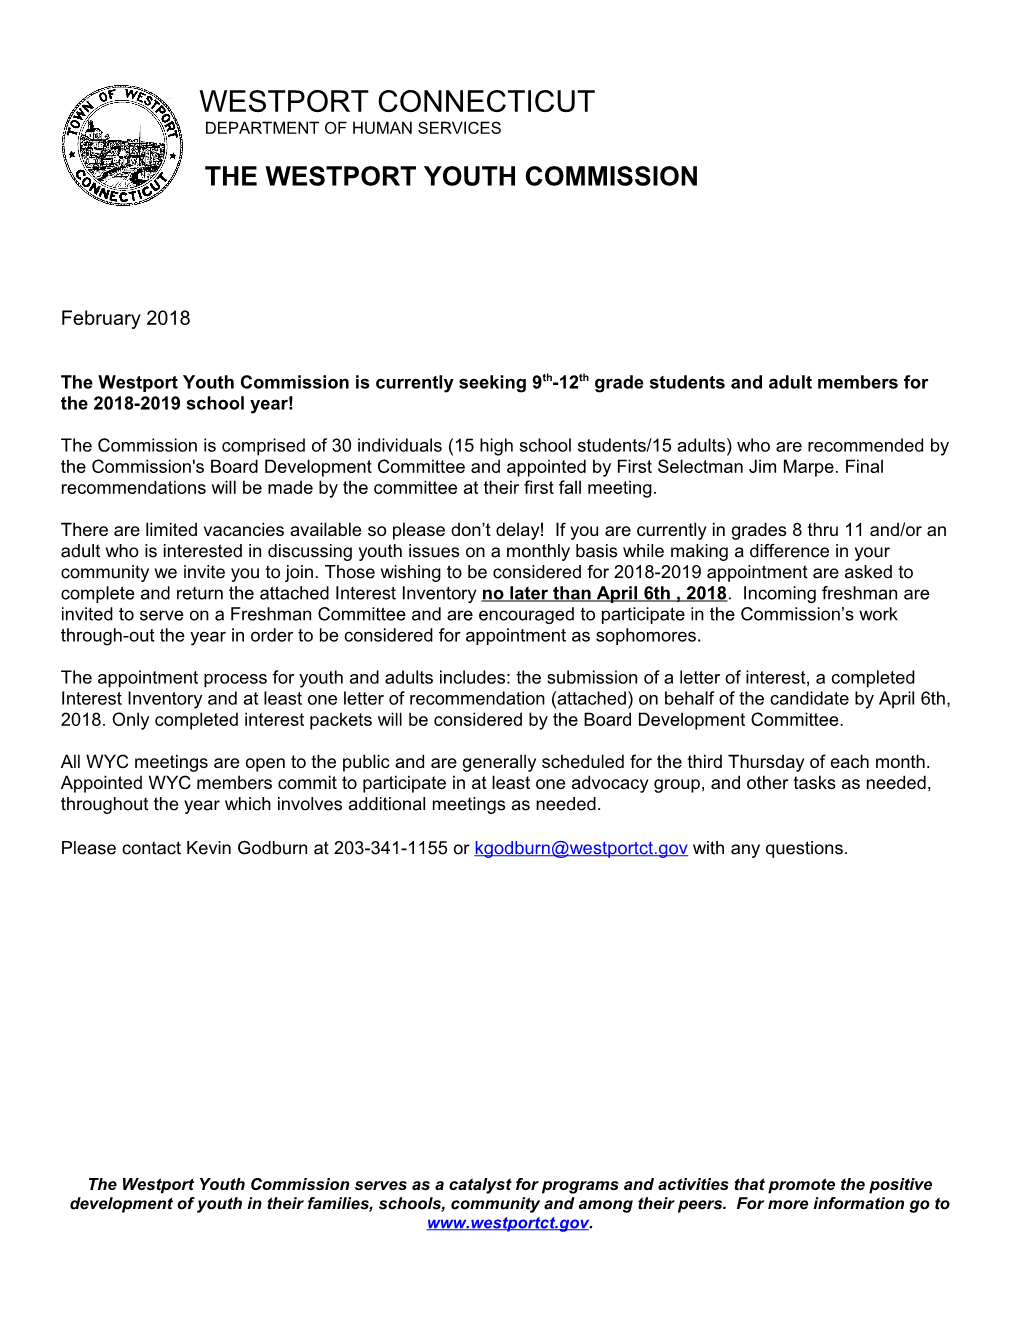 The Westport Youth Commission